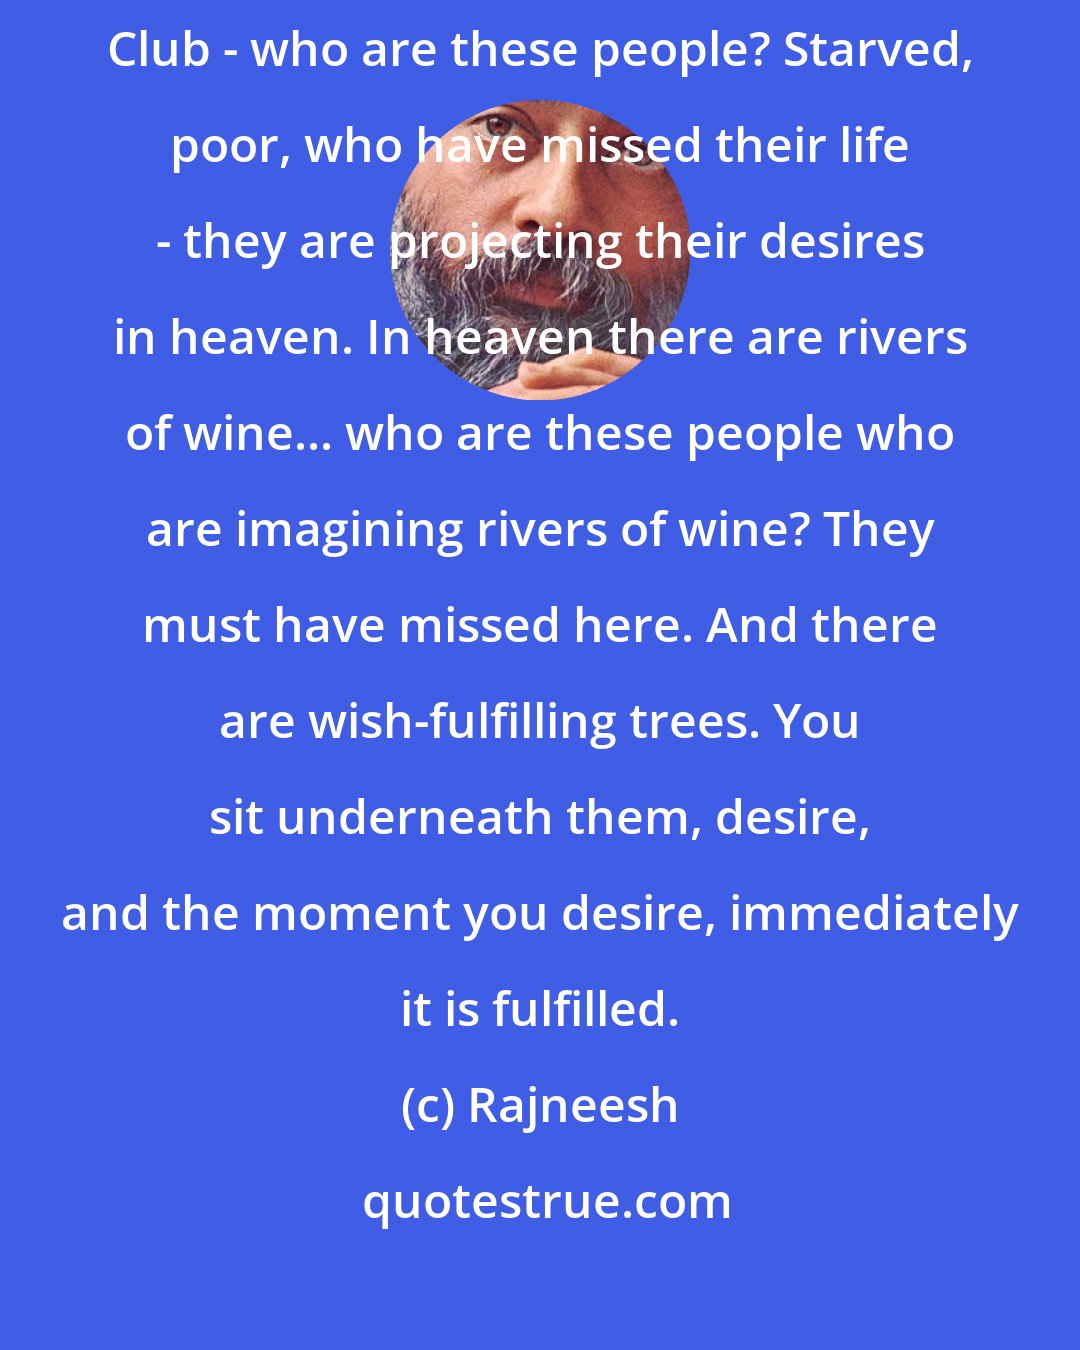 Rajneesh: What do you think? Who are these people who have depicted heaven as a playboy Club - who are these people? Starved, poor, who have missed their life - they are projecting their desires in heaven. In heaven there are rivers of wine... who are these people who are imagining rivers of wine? They must have missed here. And there are wish-fulfilling trees. You sit underneath them, desire, and the moment you desire, immediately it is fulfilled.